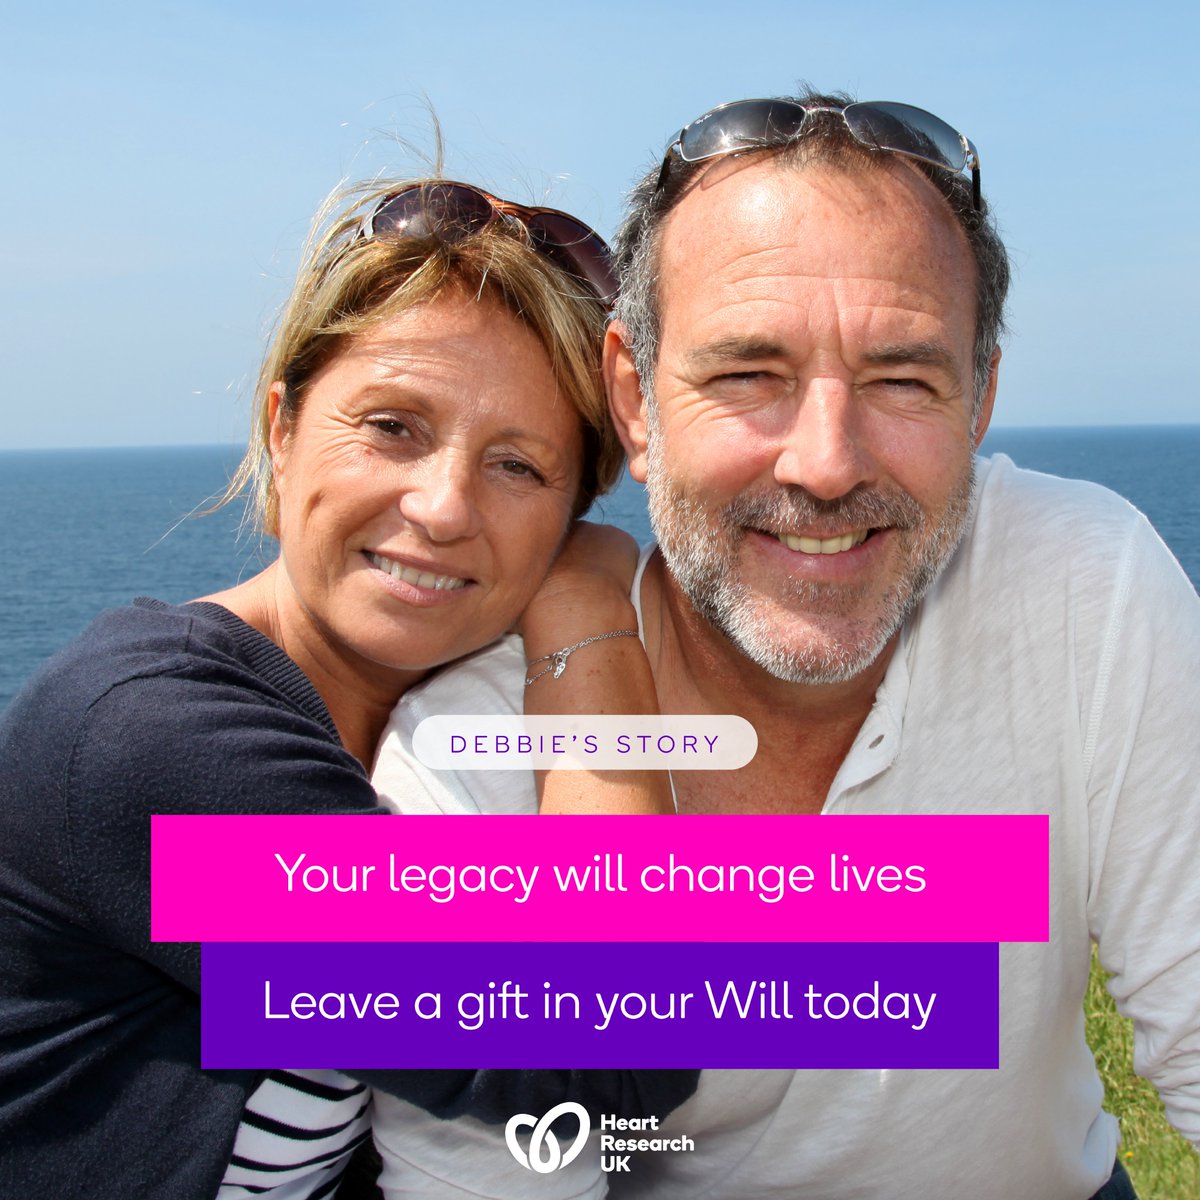 “Ian and I got married when we were 19. When Ian was 56, he was diagnosed with a heart condition. I lost my soul mate just before his 60th birthday.'' Your support will keep families together for longer, choose to leave a gift in your Will today. heartresearch.org.uk/leave-a-gift-i…